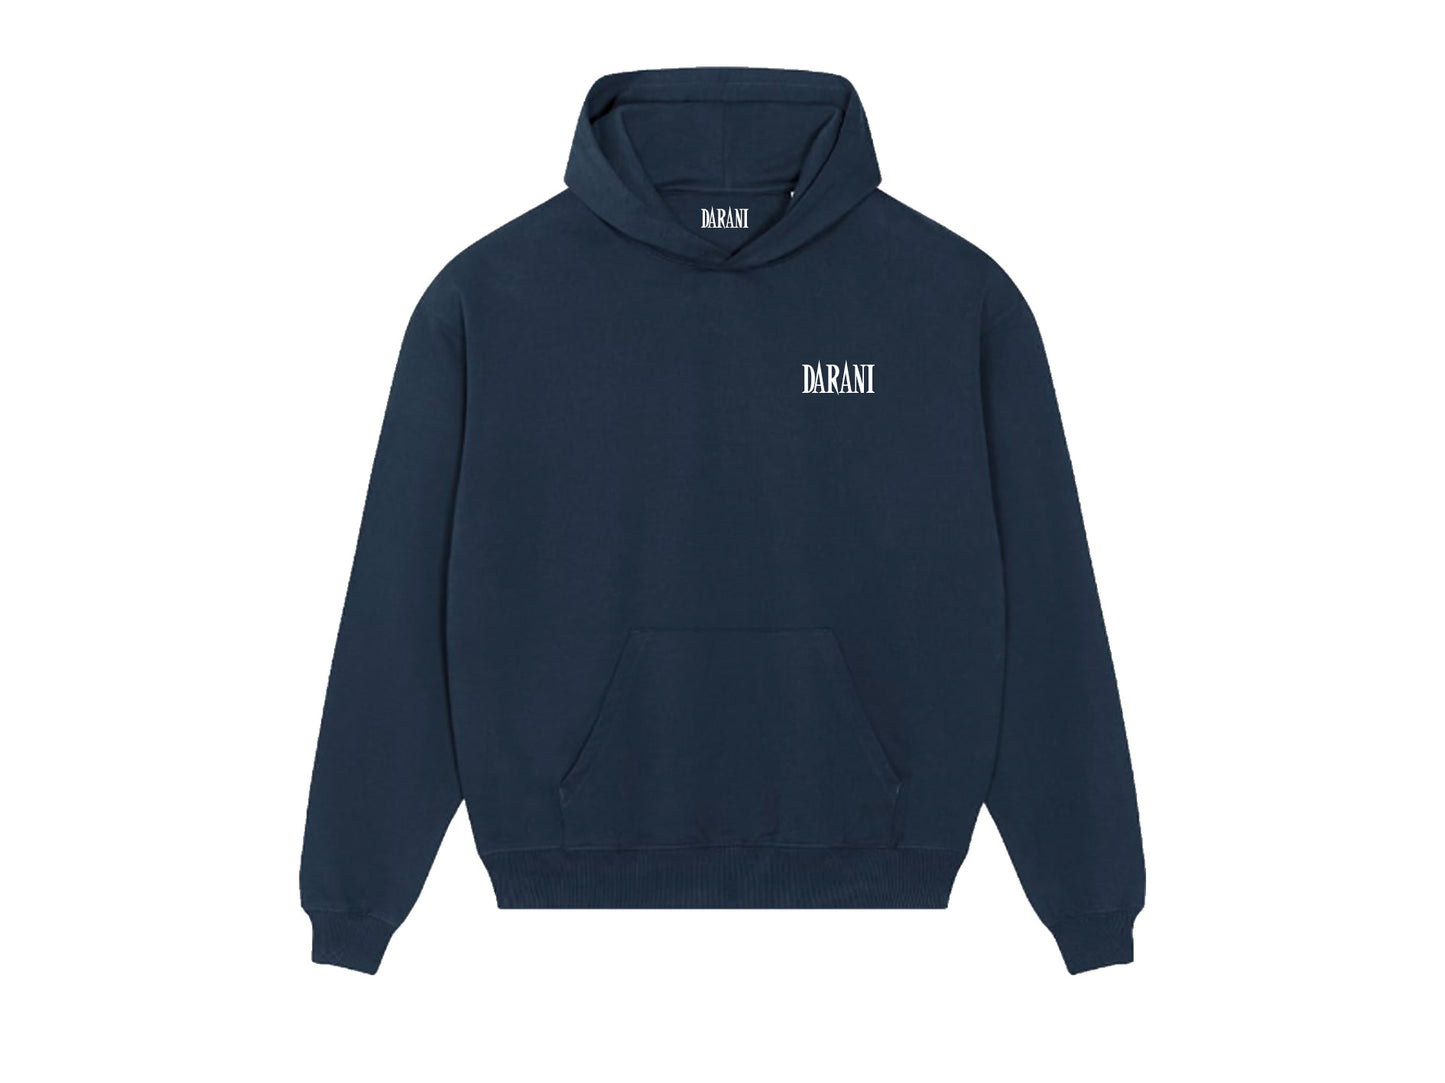 ALL ROUNDER HOODY FRENCH NAVY